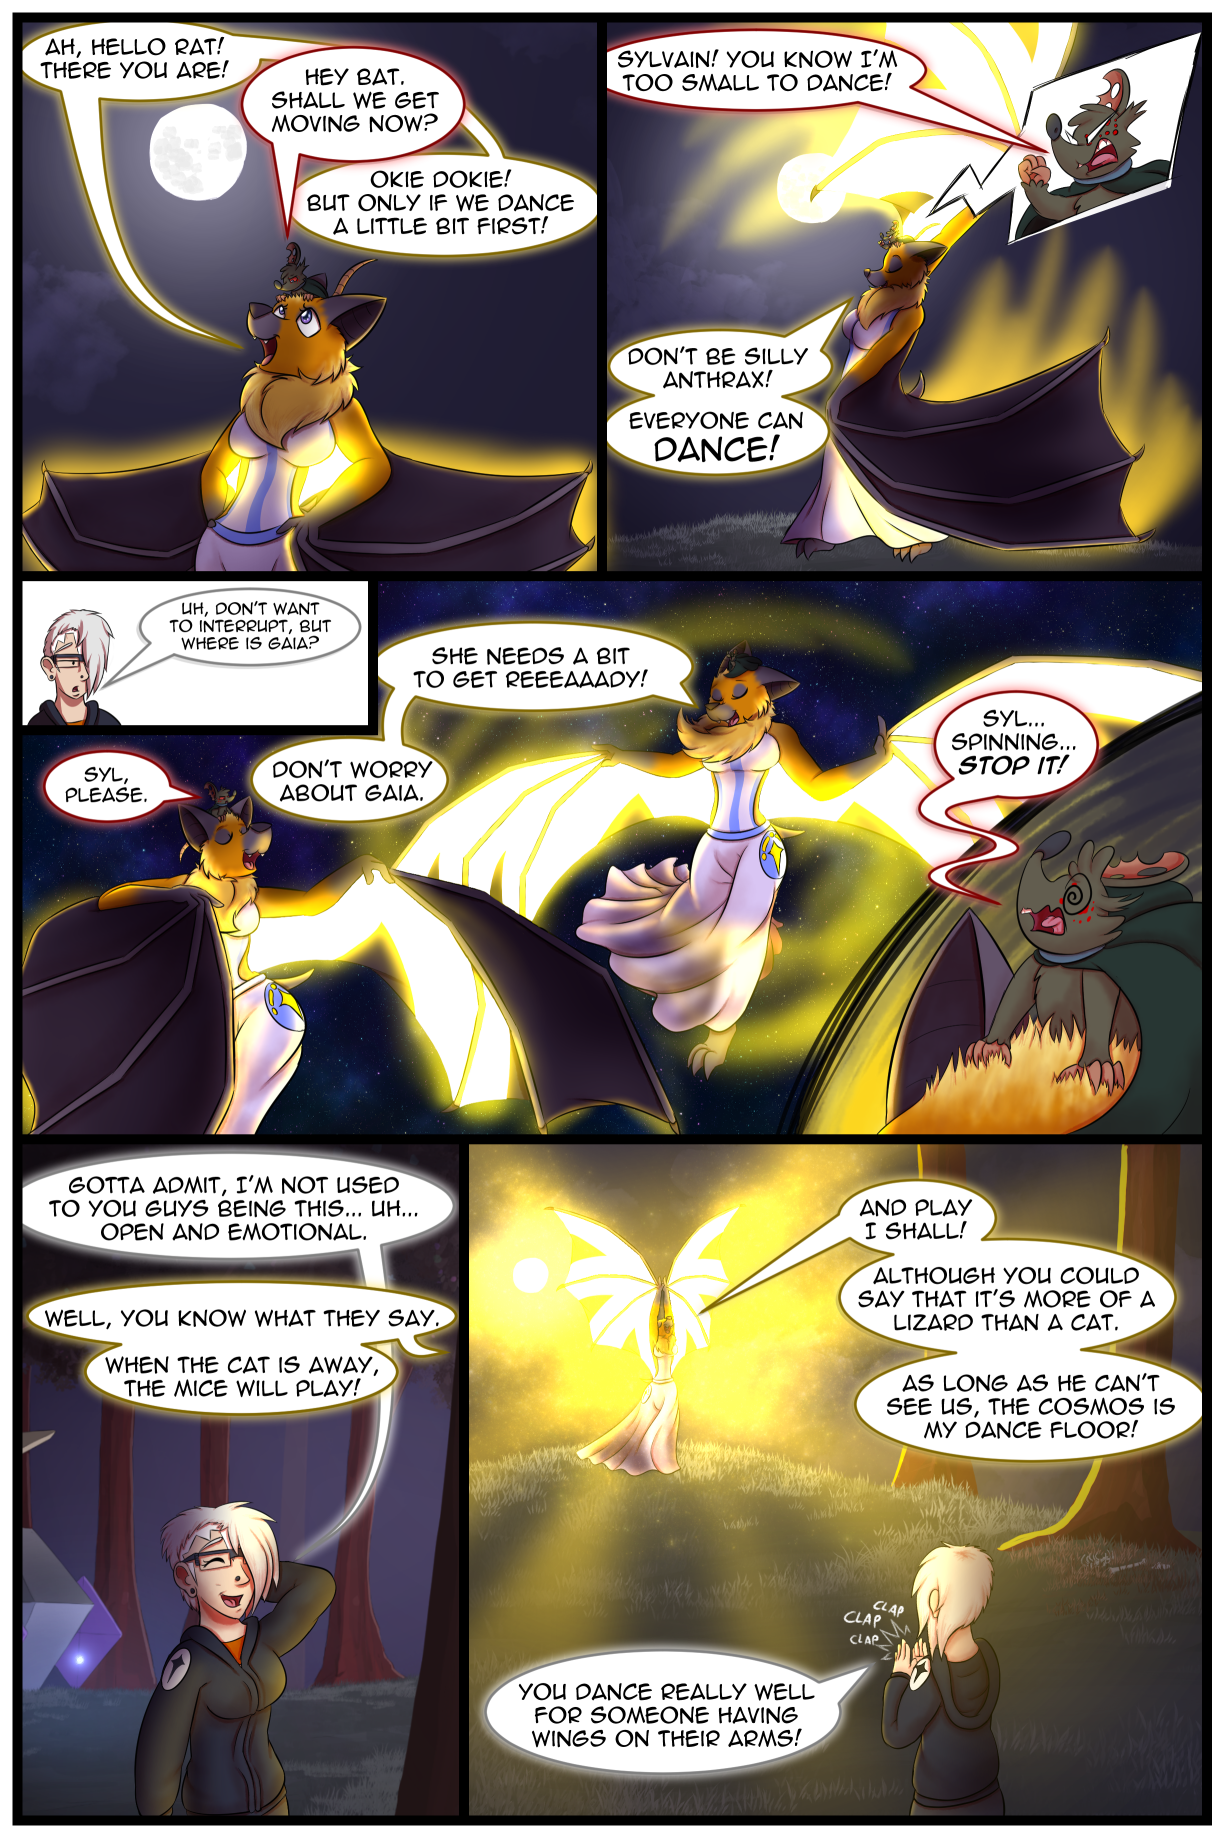 Ch5 Page 5 – Dance!